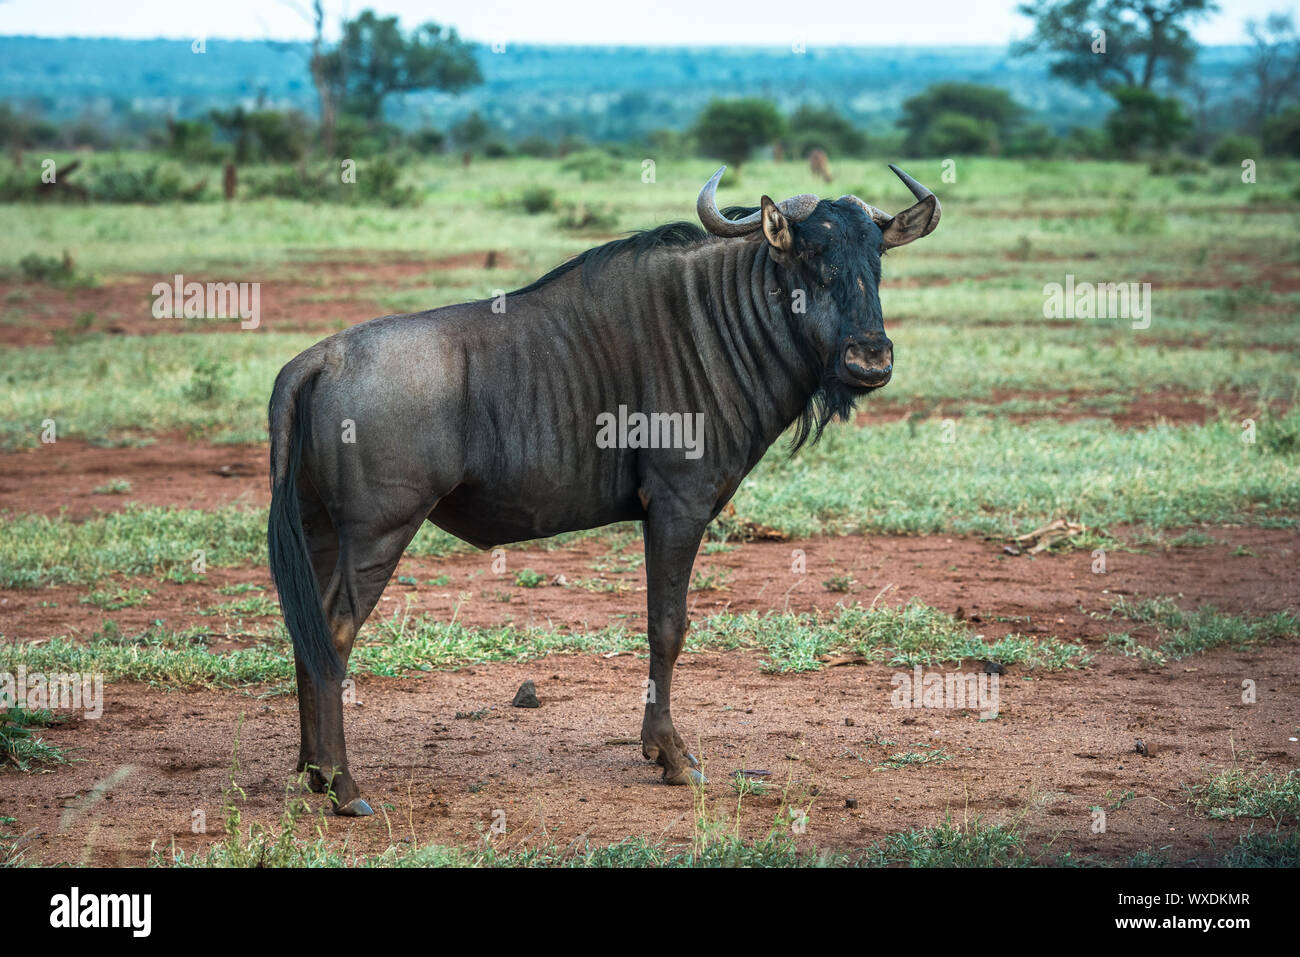 Blue wildebeest in Kruger National Park, South Africa Stock Photo